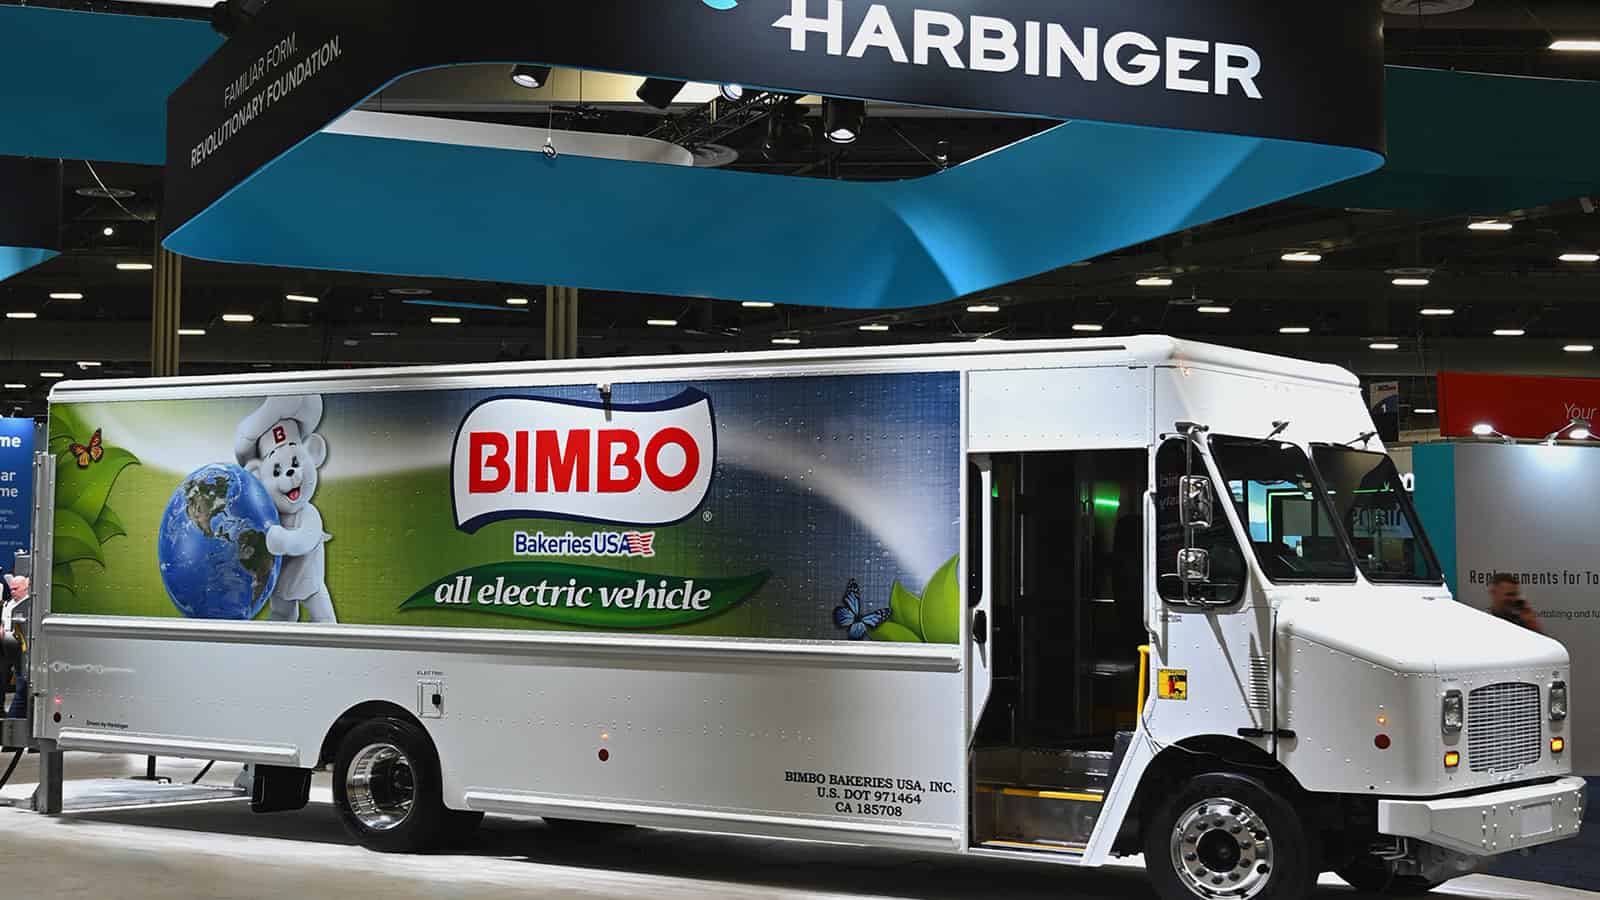 Harbinger electric truck Bimbo bakeries, parked inside of auto show